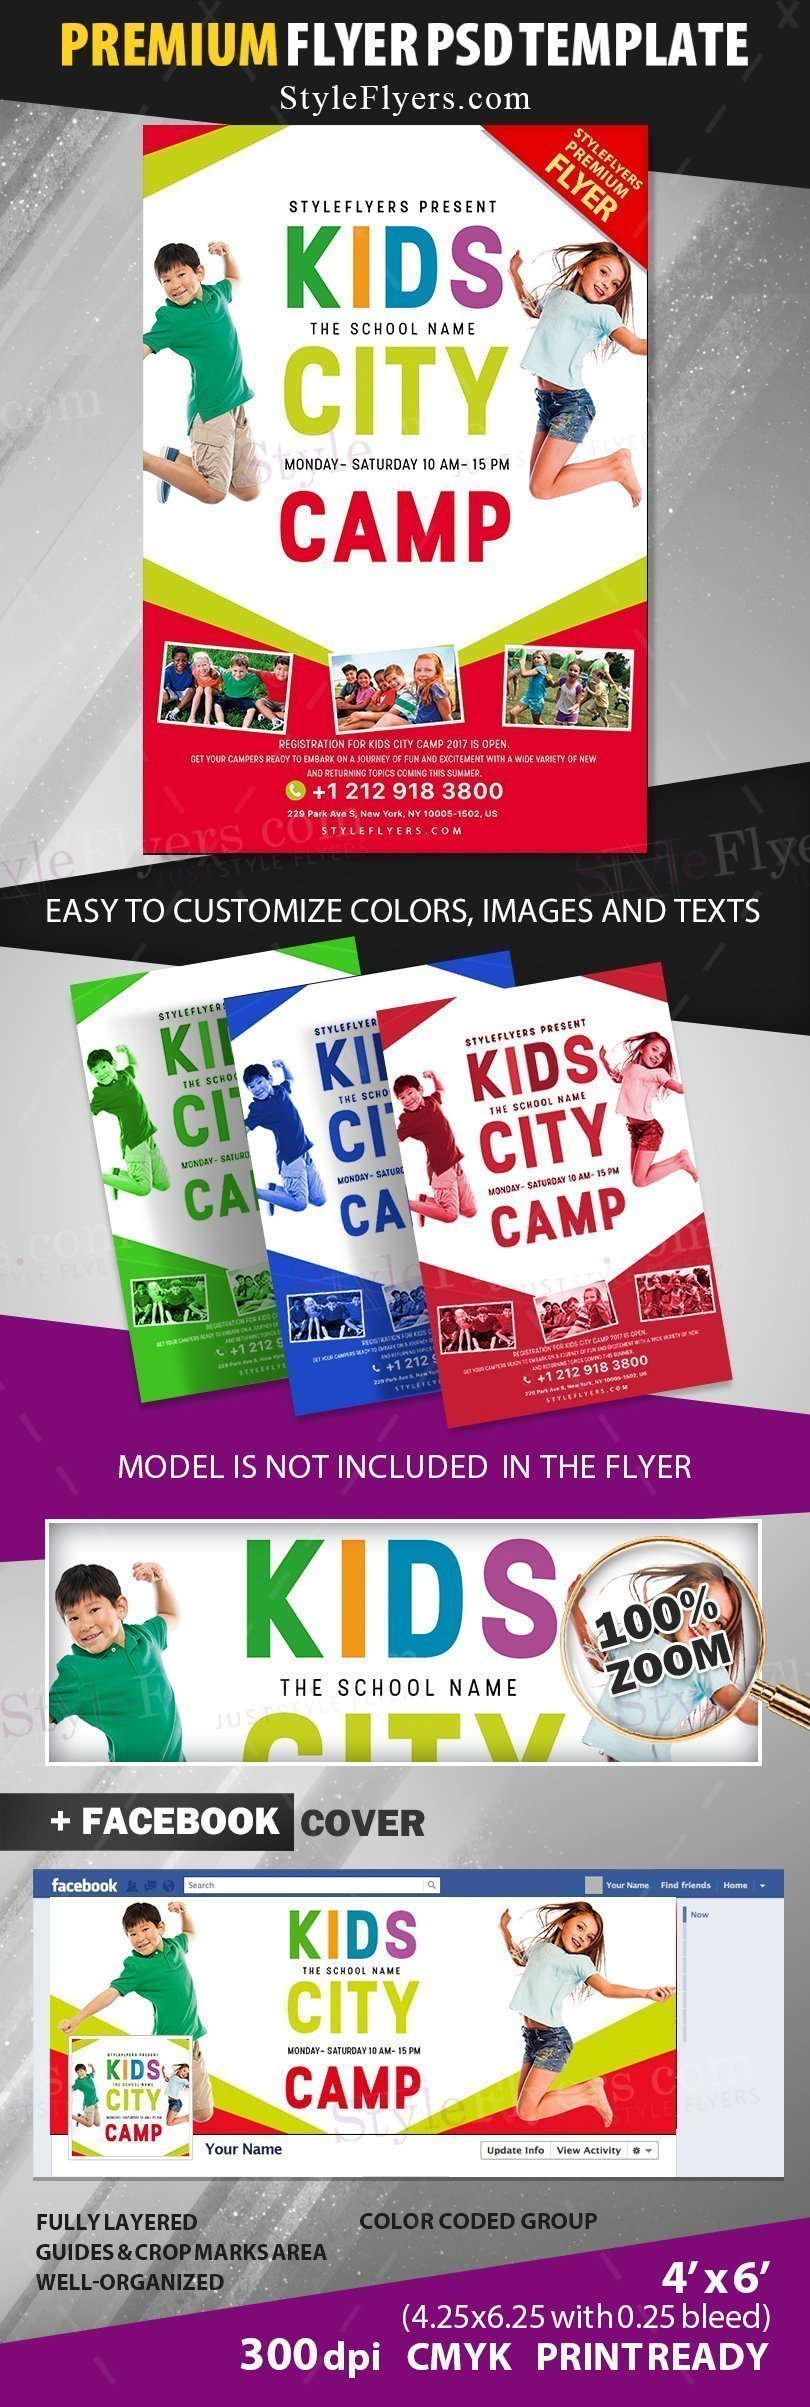 preview_kids city camp_psd_flyer